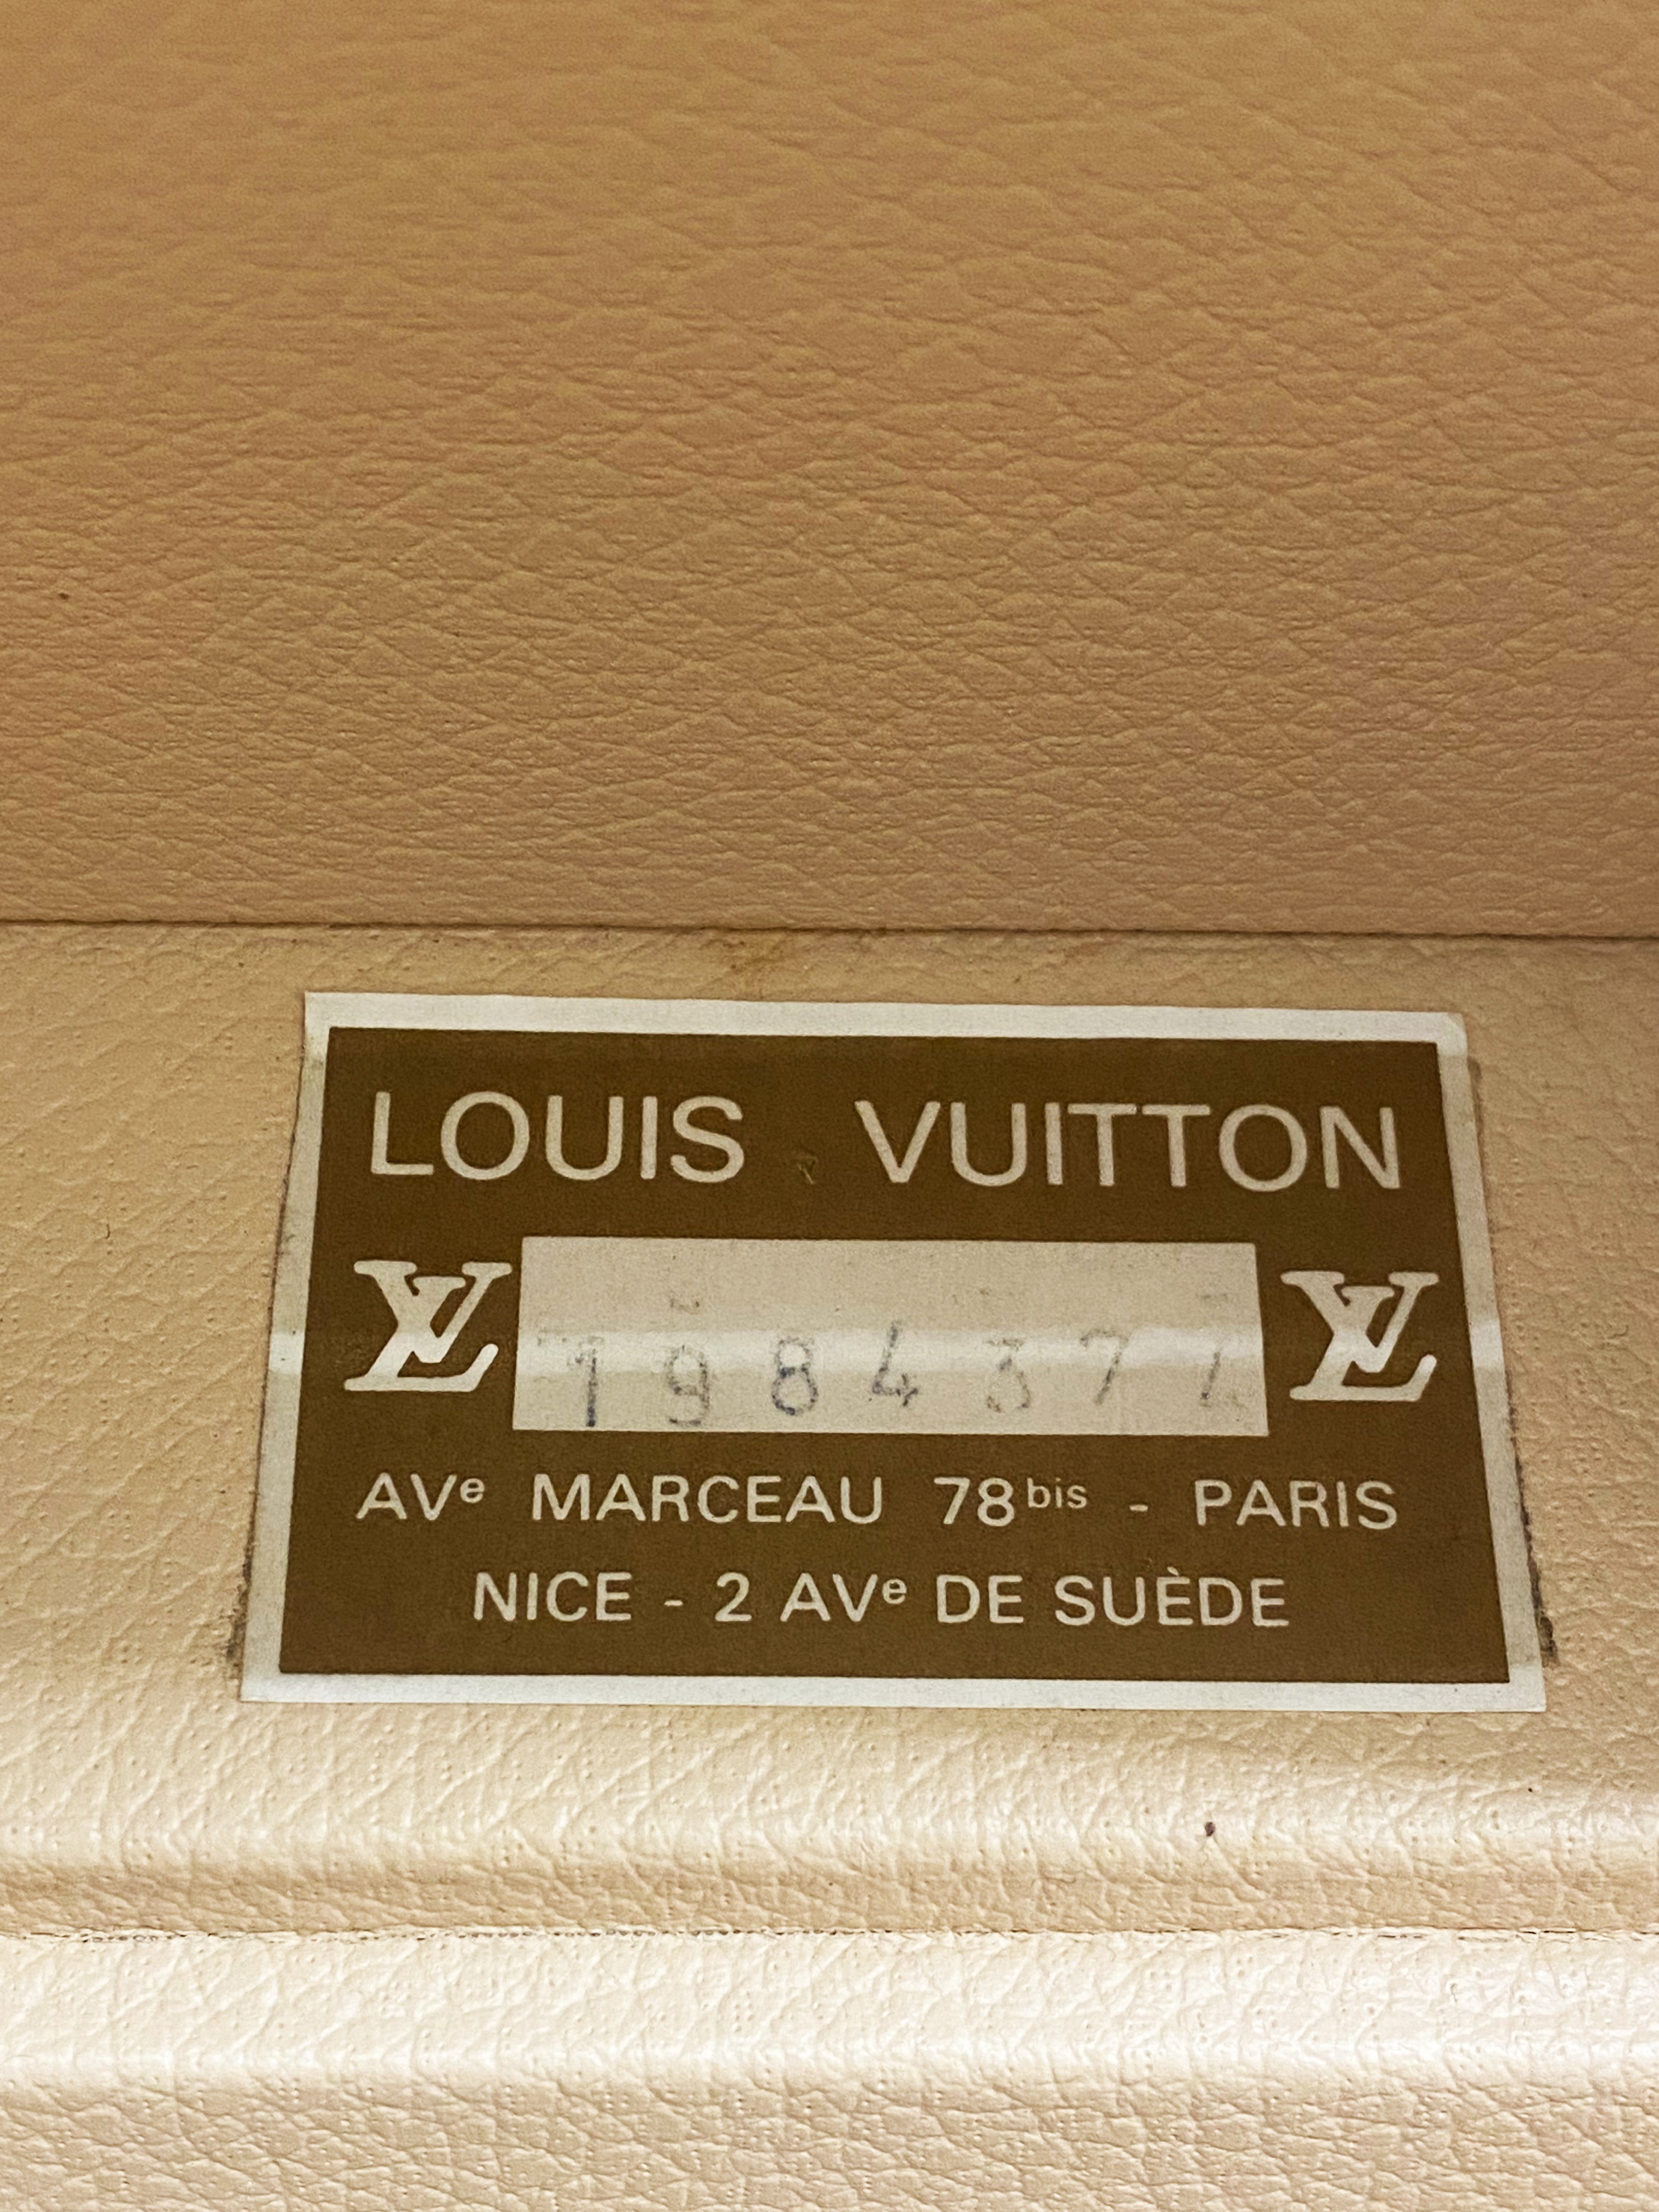 Louis Vuitton 1980s-1990s Pre-owned Boite Vanity Case - Brown